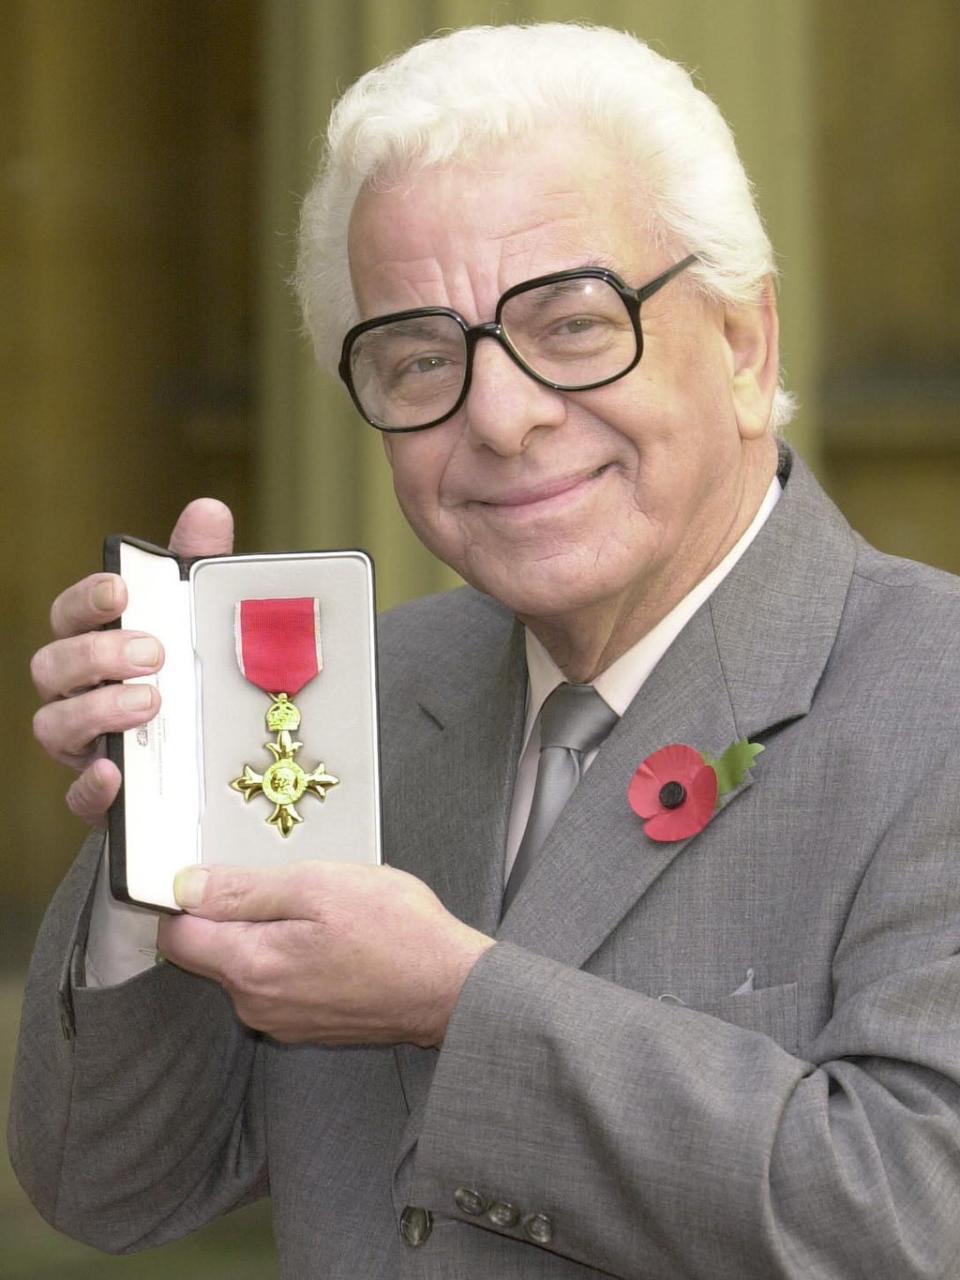 At Buckingham Palace to accept his OBE from the Queen in November 2001 (PA)